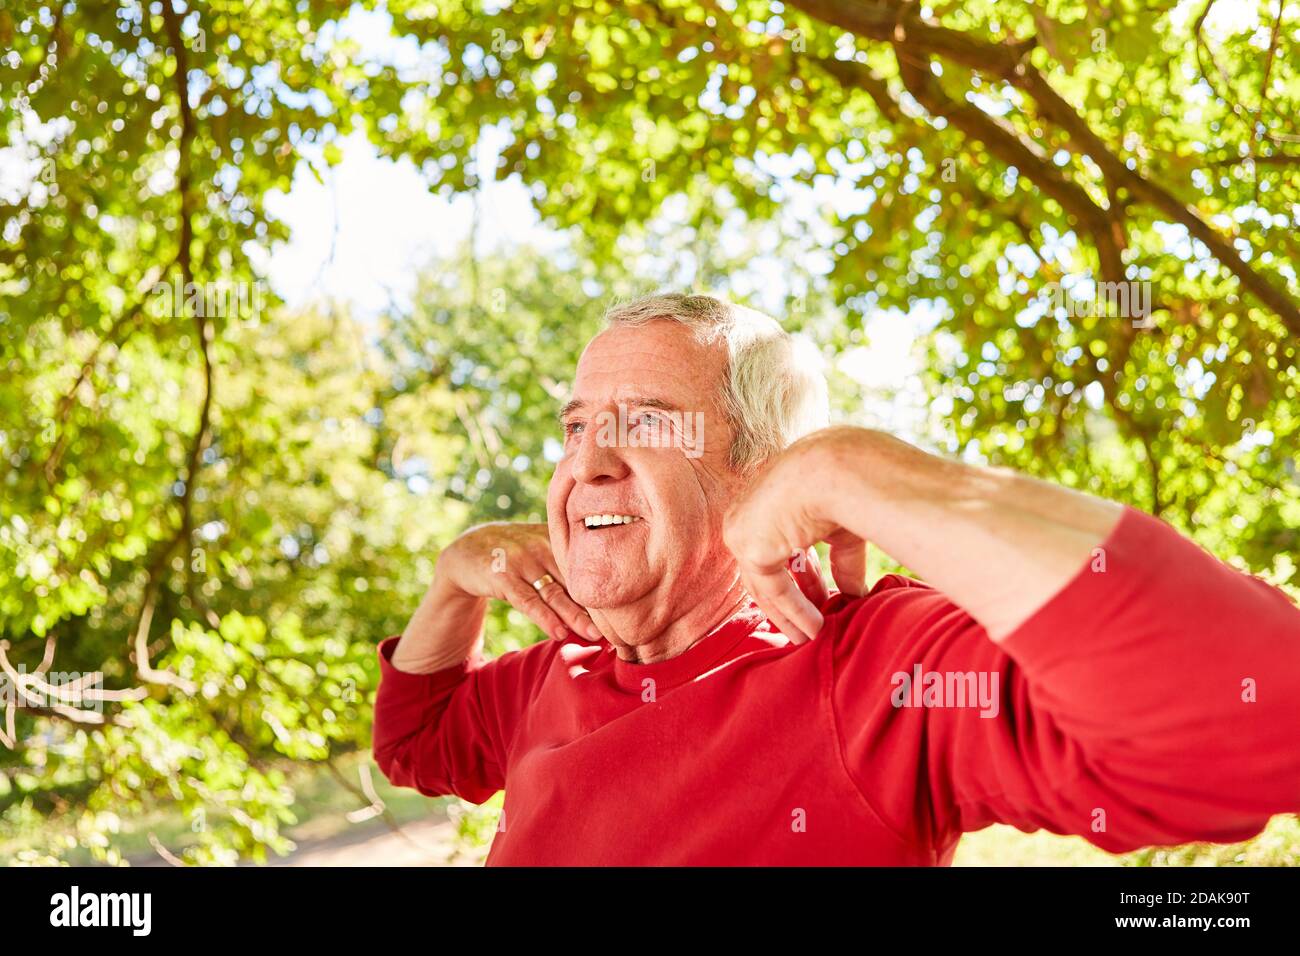 Smiling senior man doing a yoga breathing exercise for health and relaxation Stock Photo